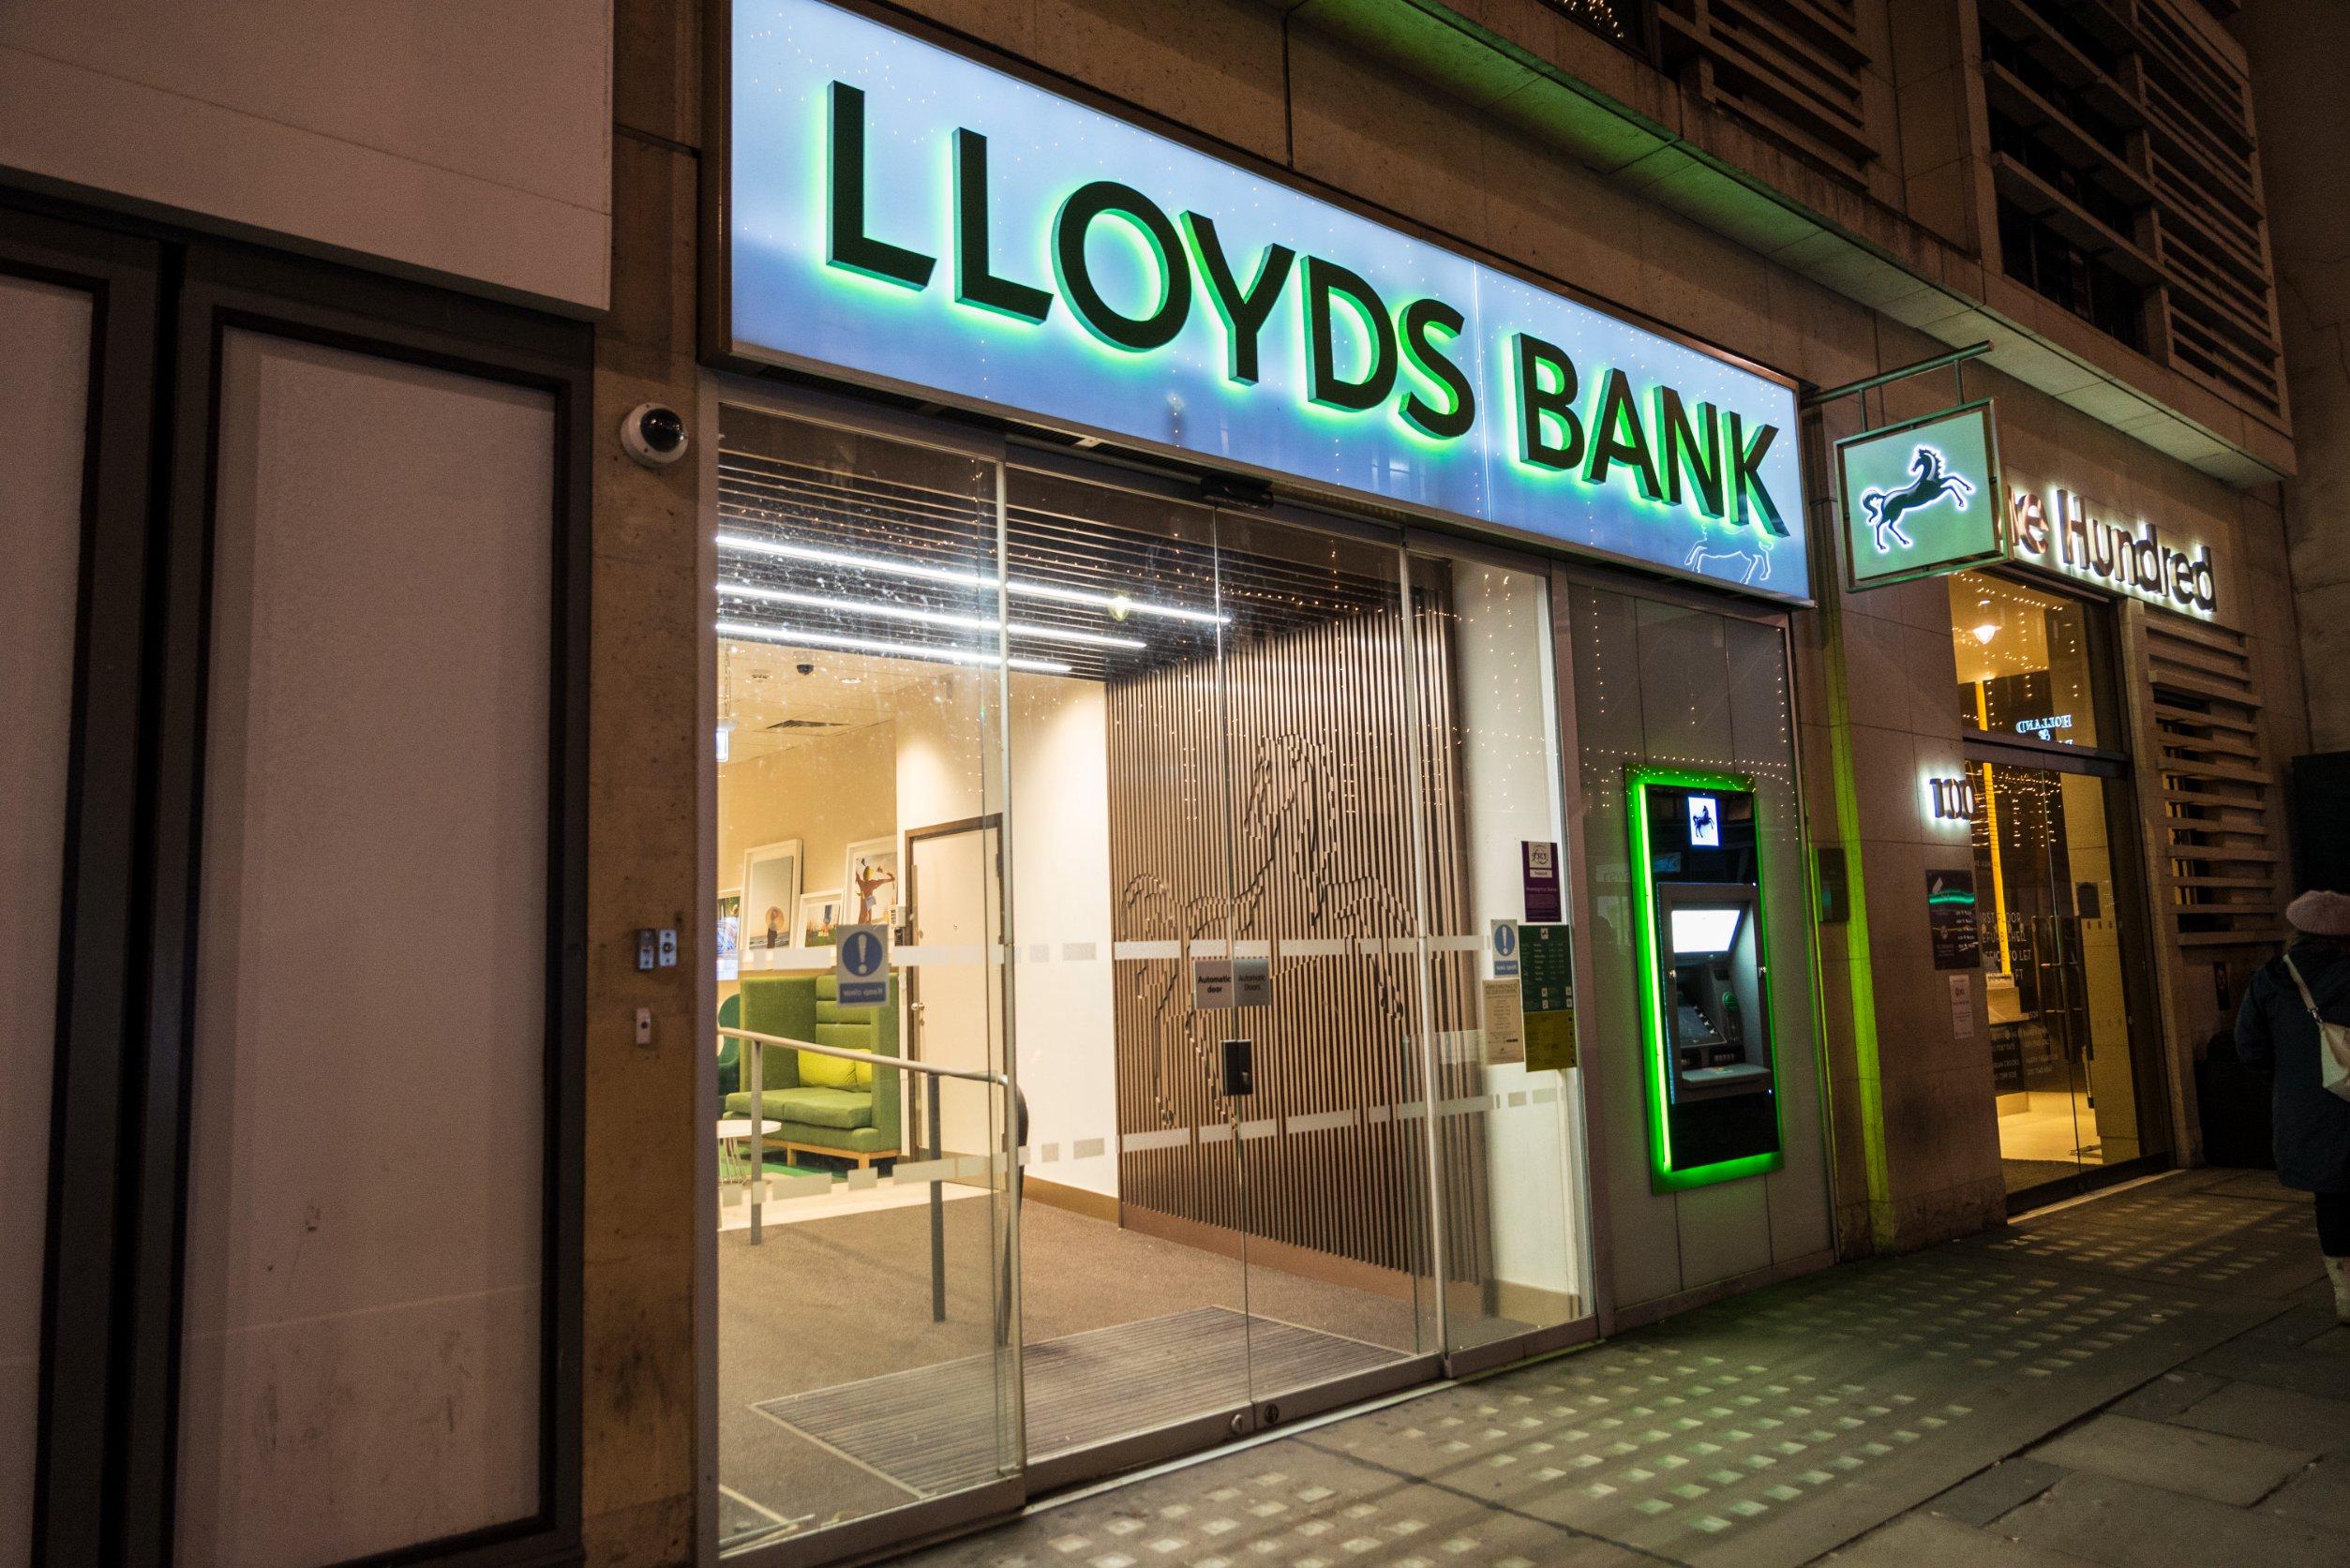 Lloyds Share Price: Focus has Shifted to Wall Street Earnings